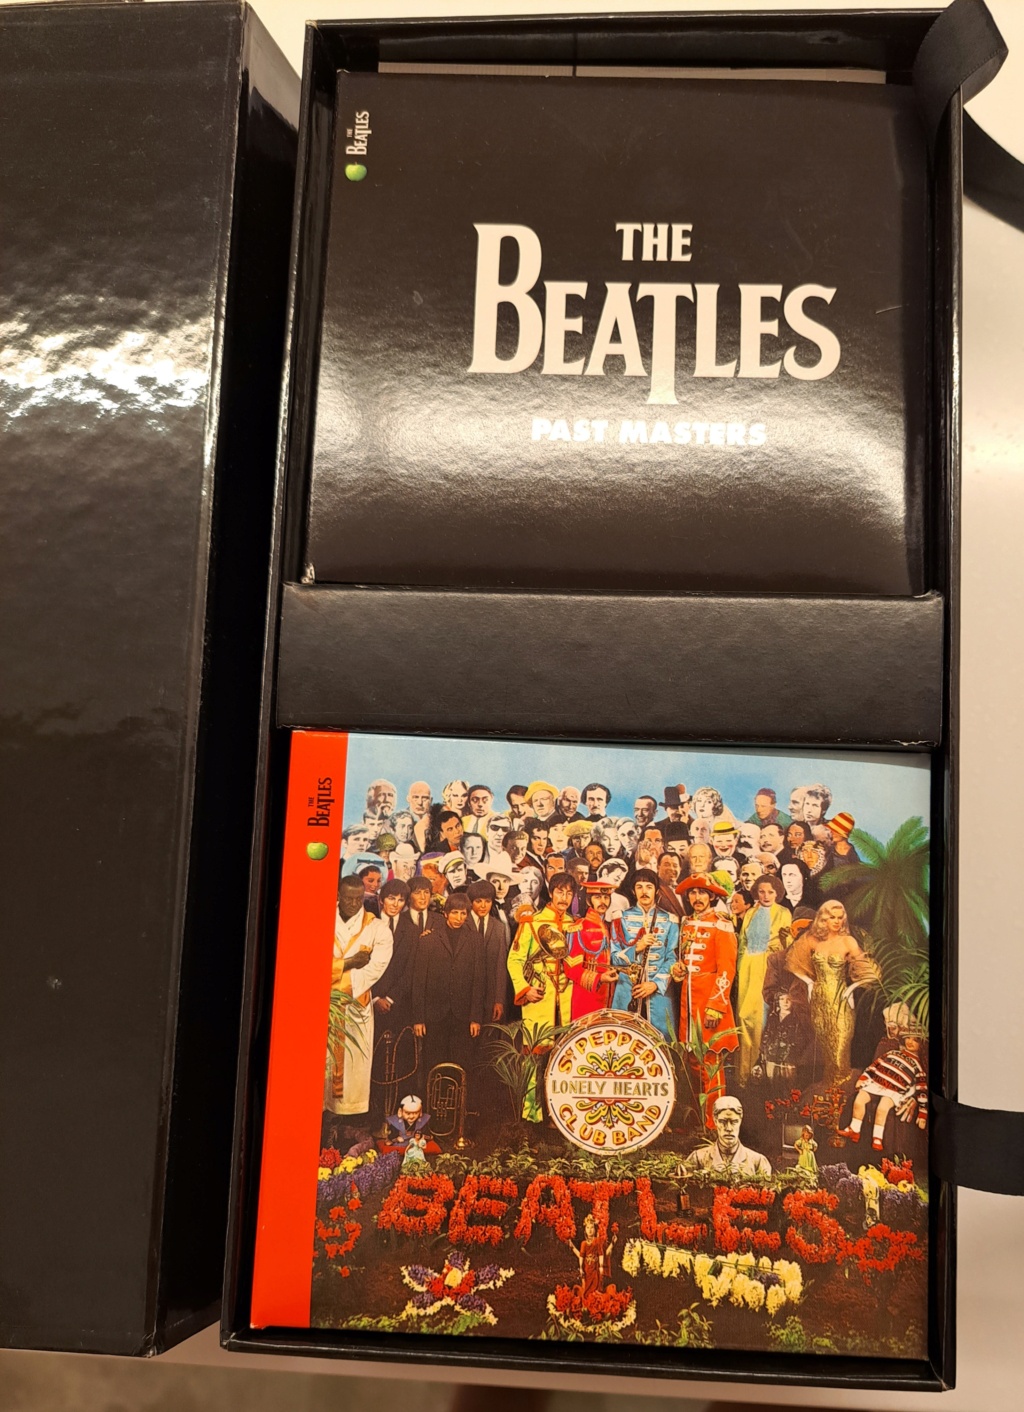 The Beatles - 17 Disc Box Set. 2009 EMI Records Remastered. Made in USA 20230373